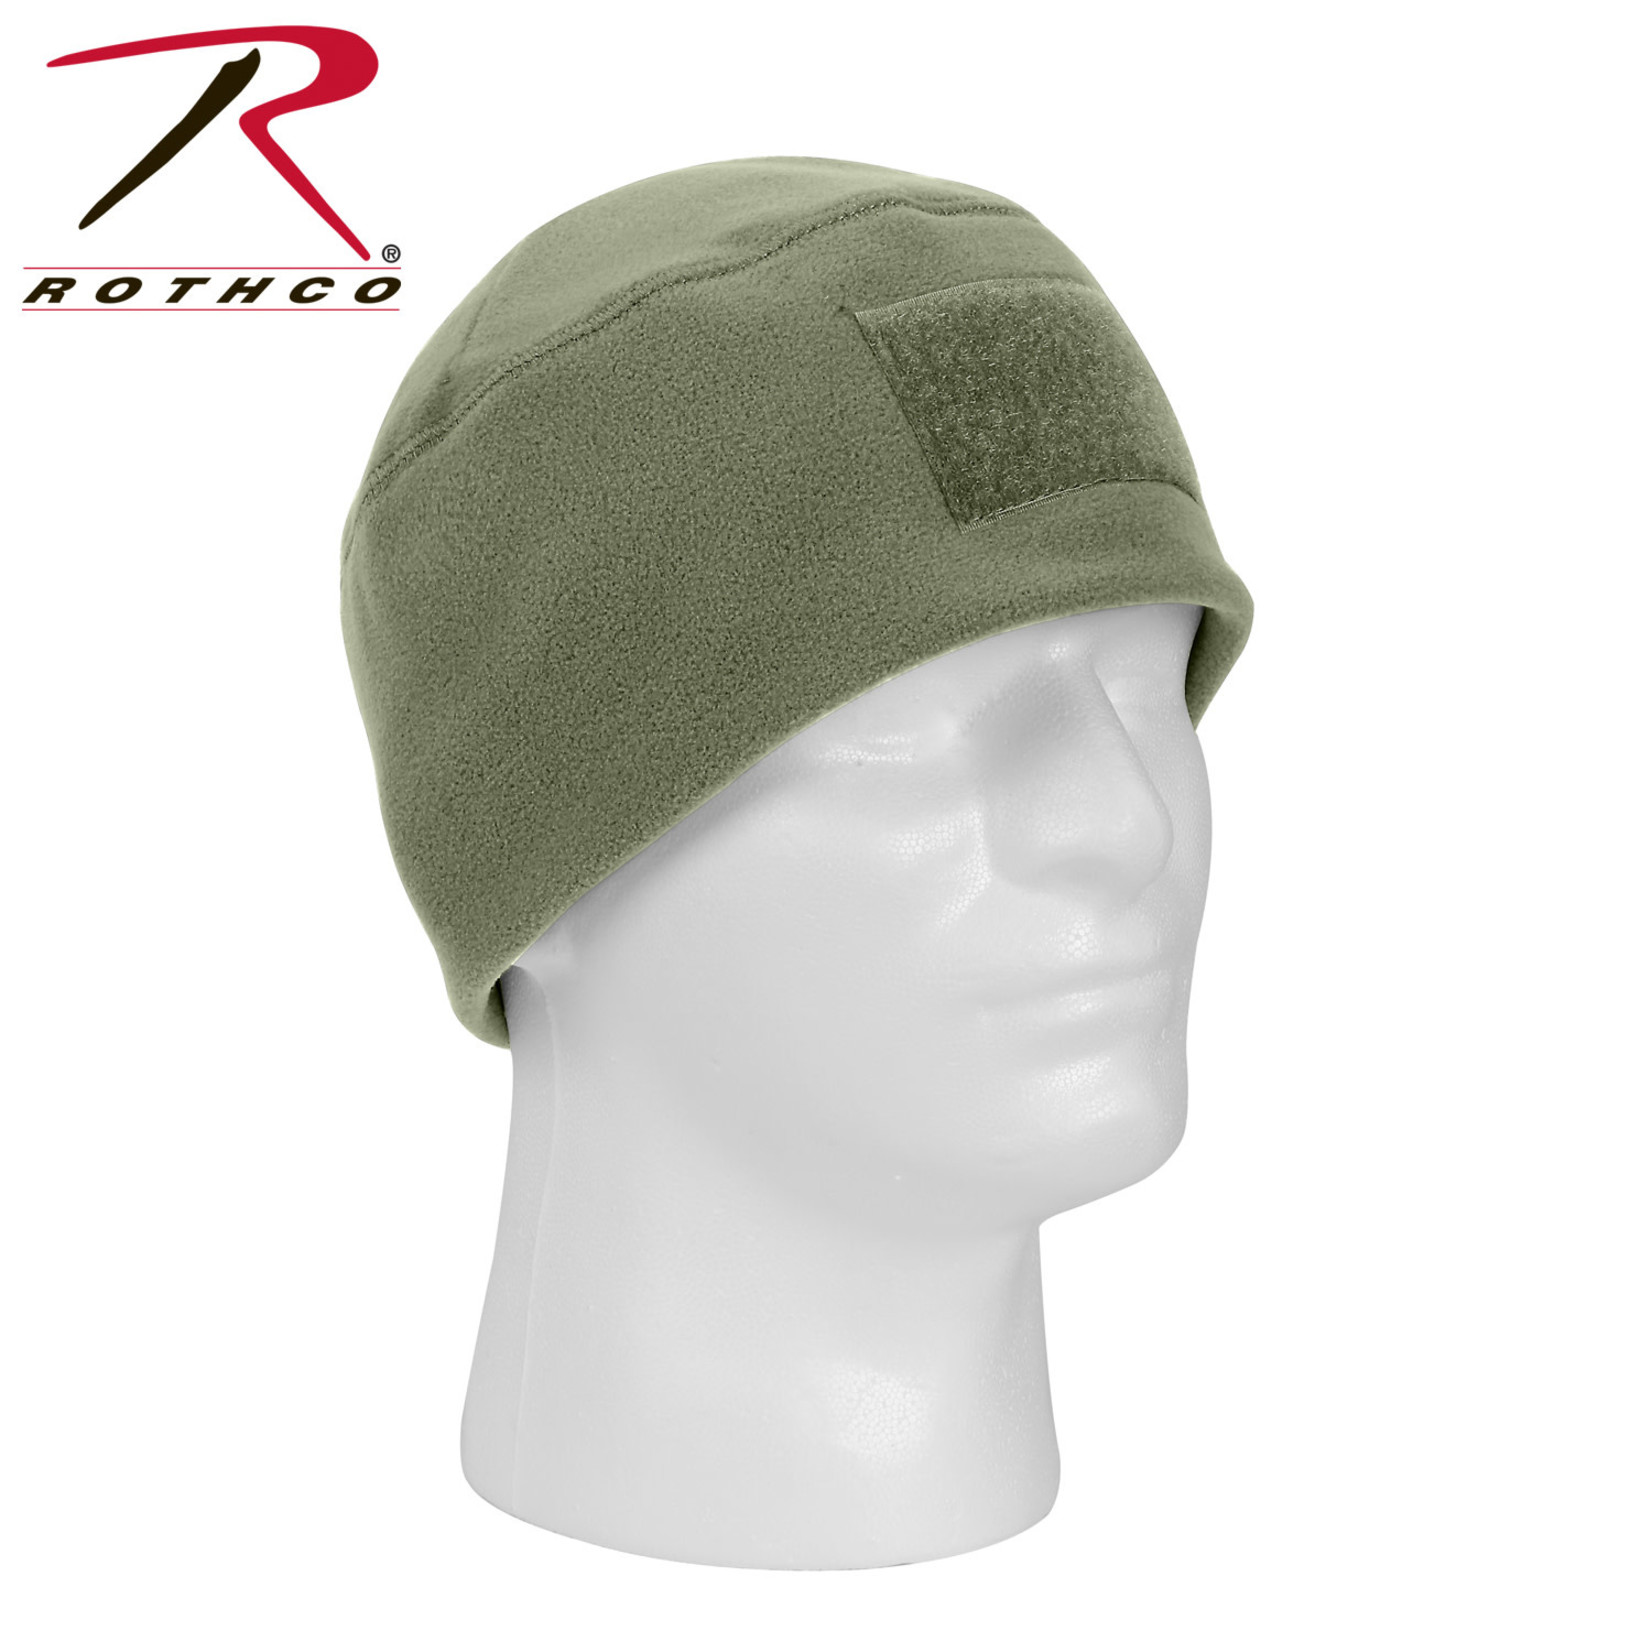 Rothco Rothco Tactical Patch-Ready Watch Cap -